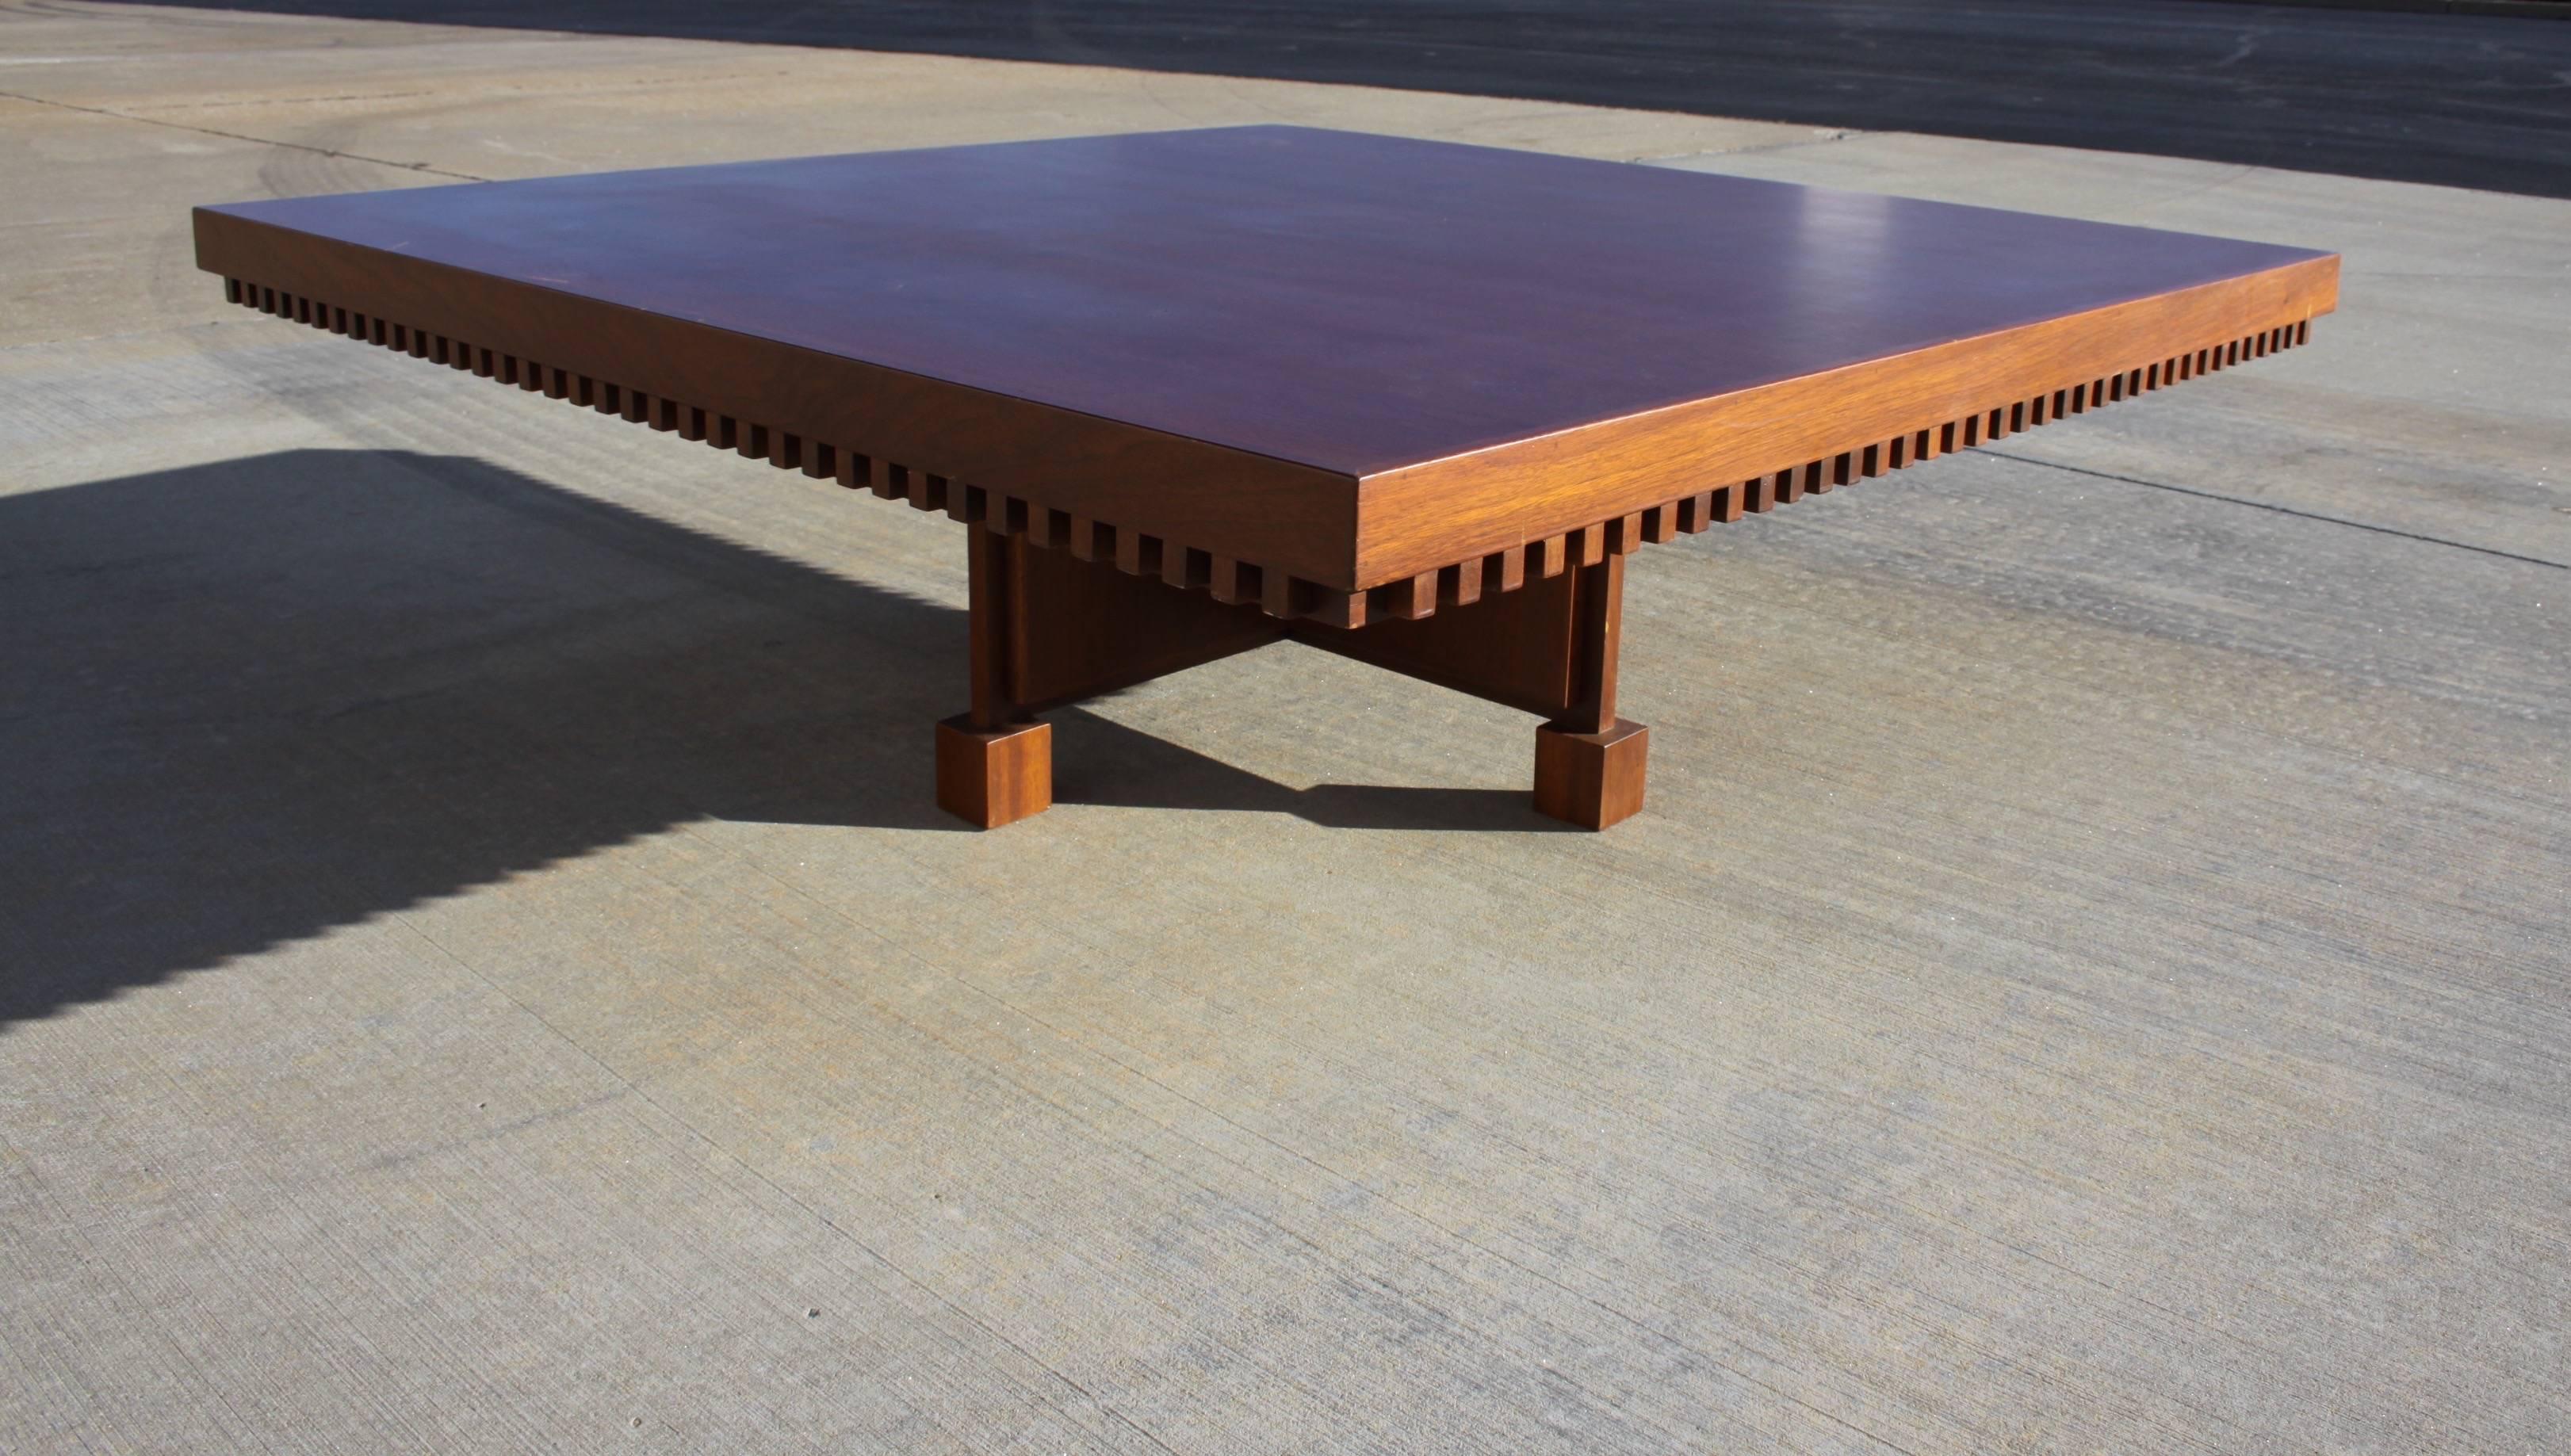 Mid-20th Century Architect Fred M. Kemp Custom Coffee Table in the style of Frank Lloyd Wright